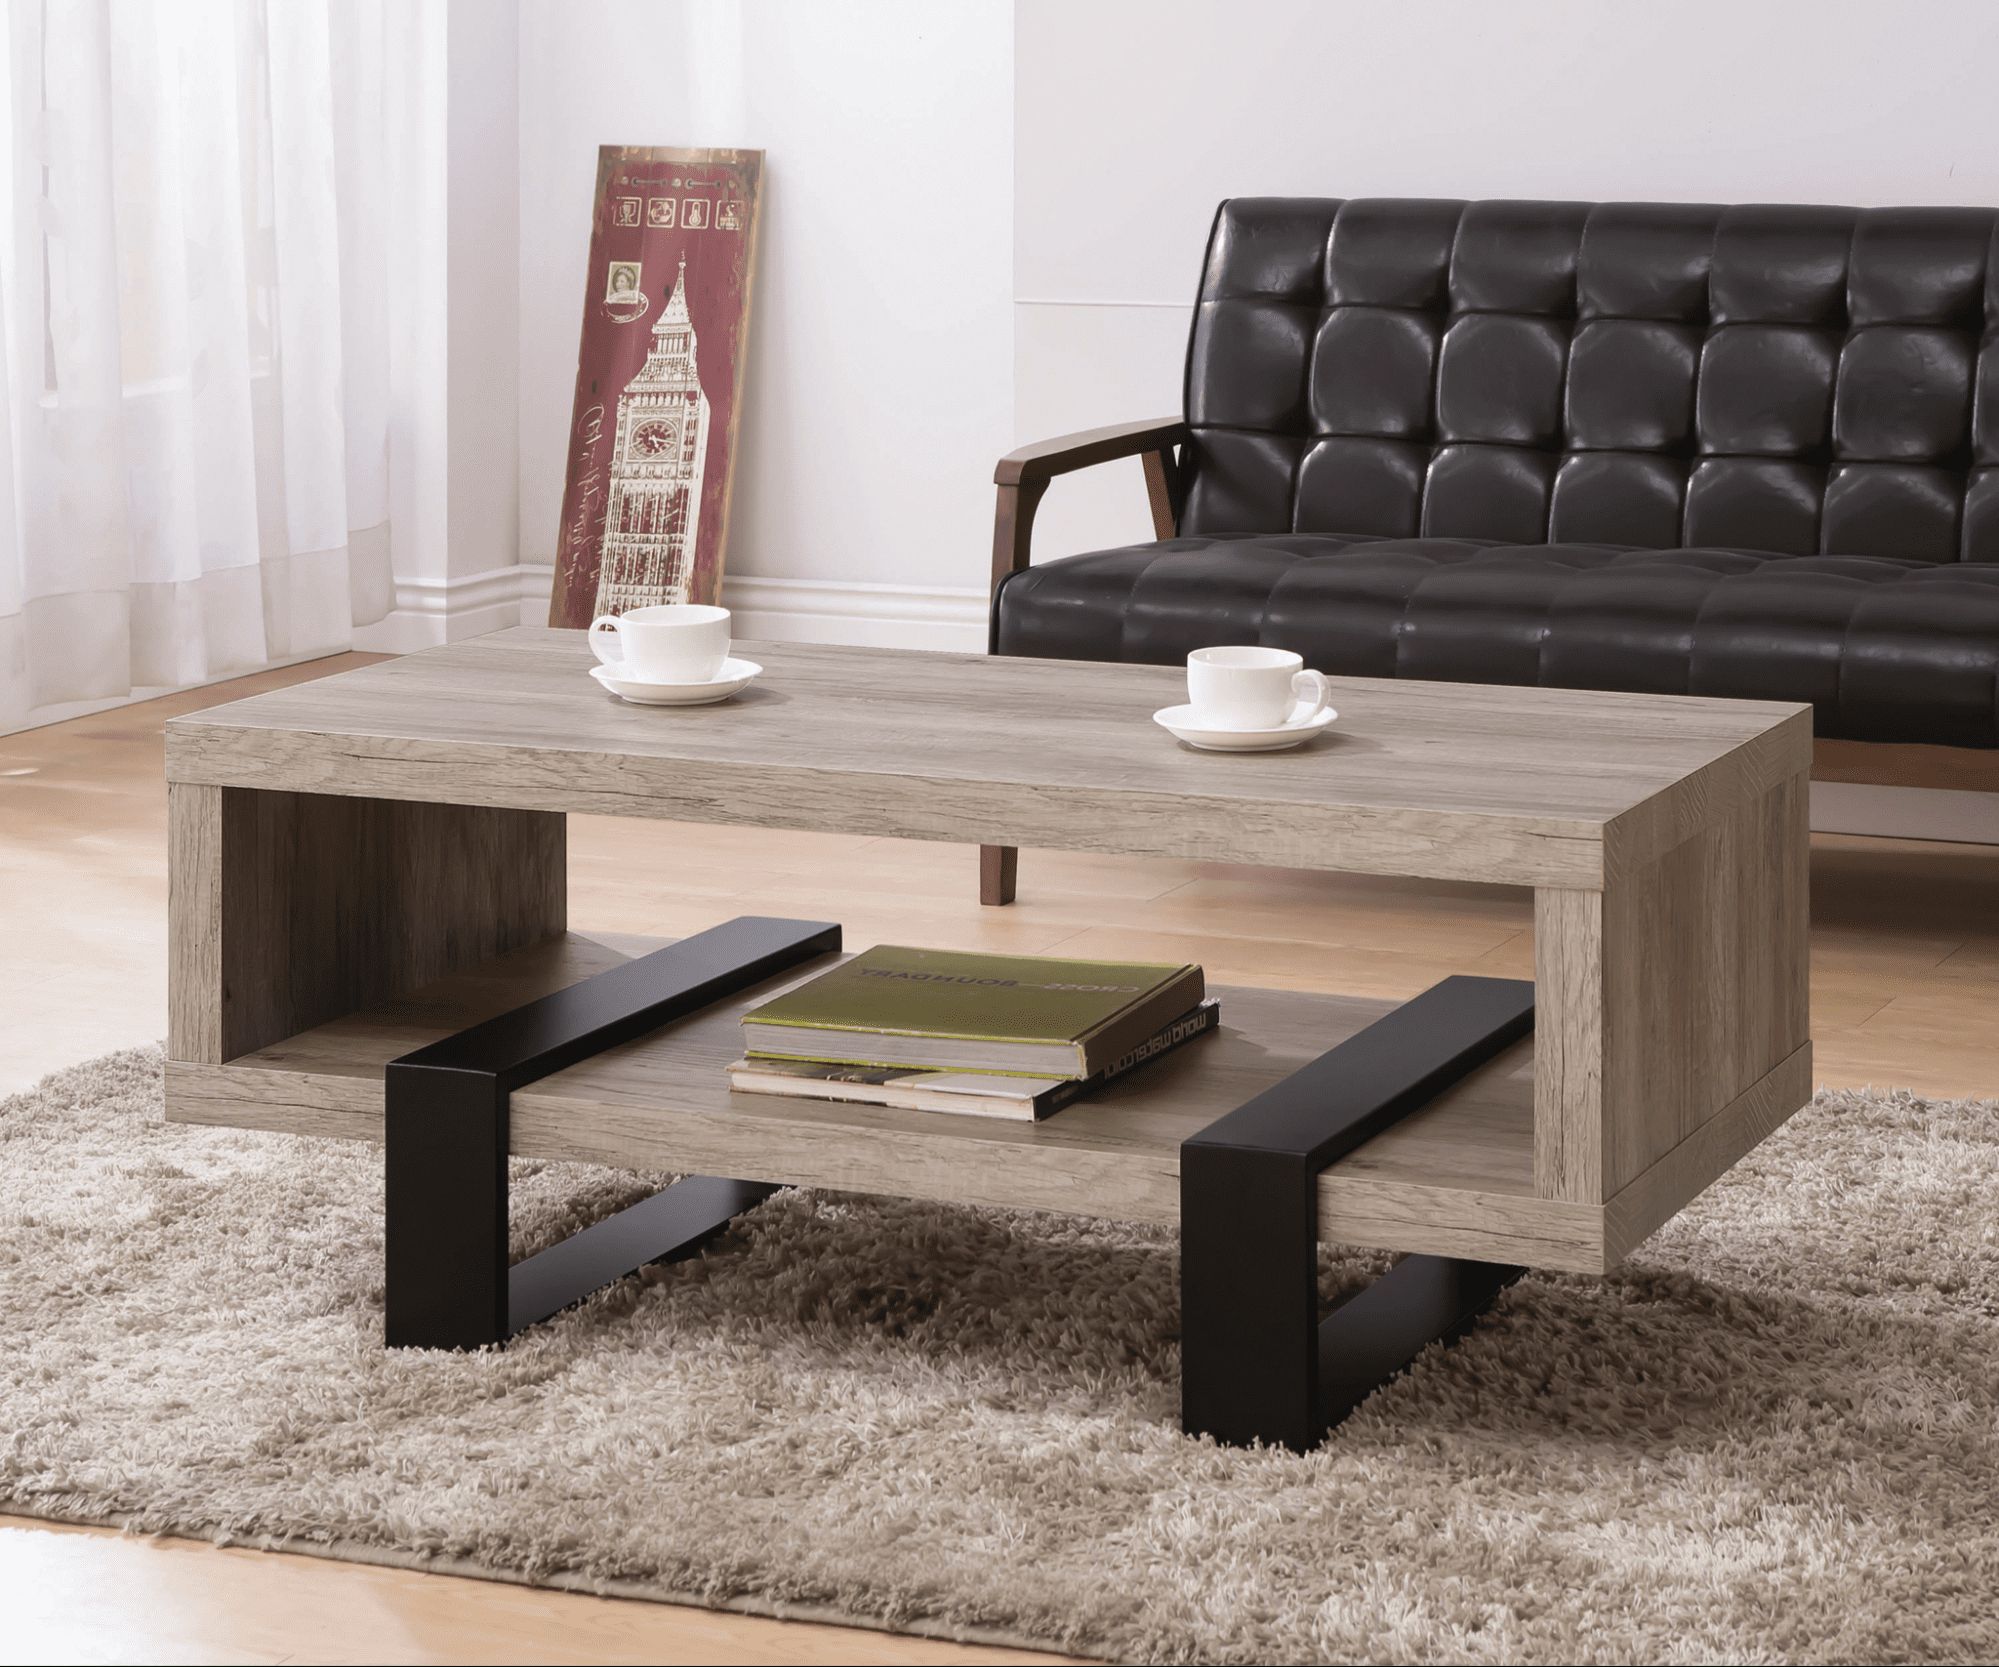 Newest Contemporary Coffee Tables With Shelf Within 11 Wood Coffee Table Styles To Add Natural Beauty To Your Ho (View 18 of 20)